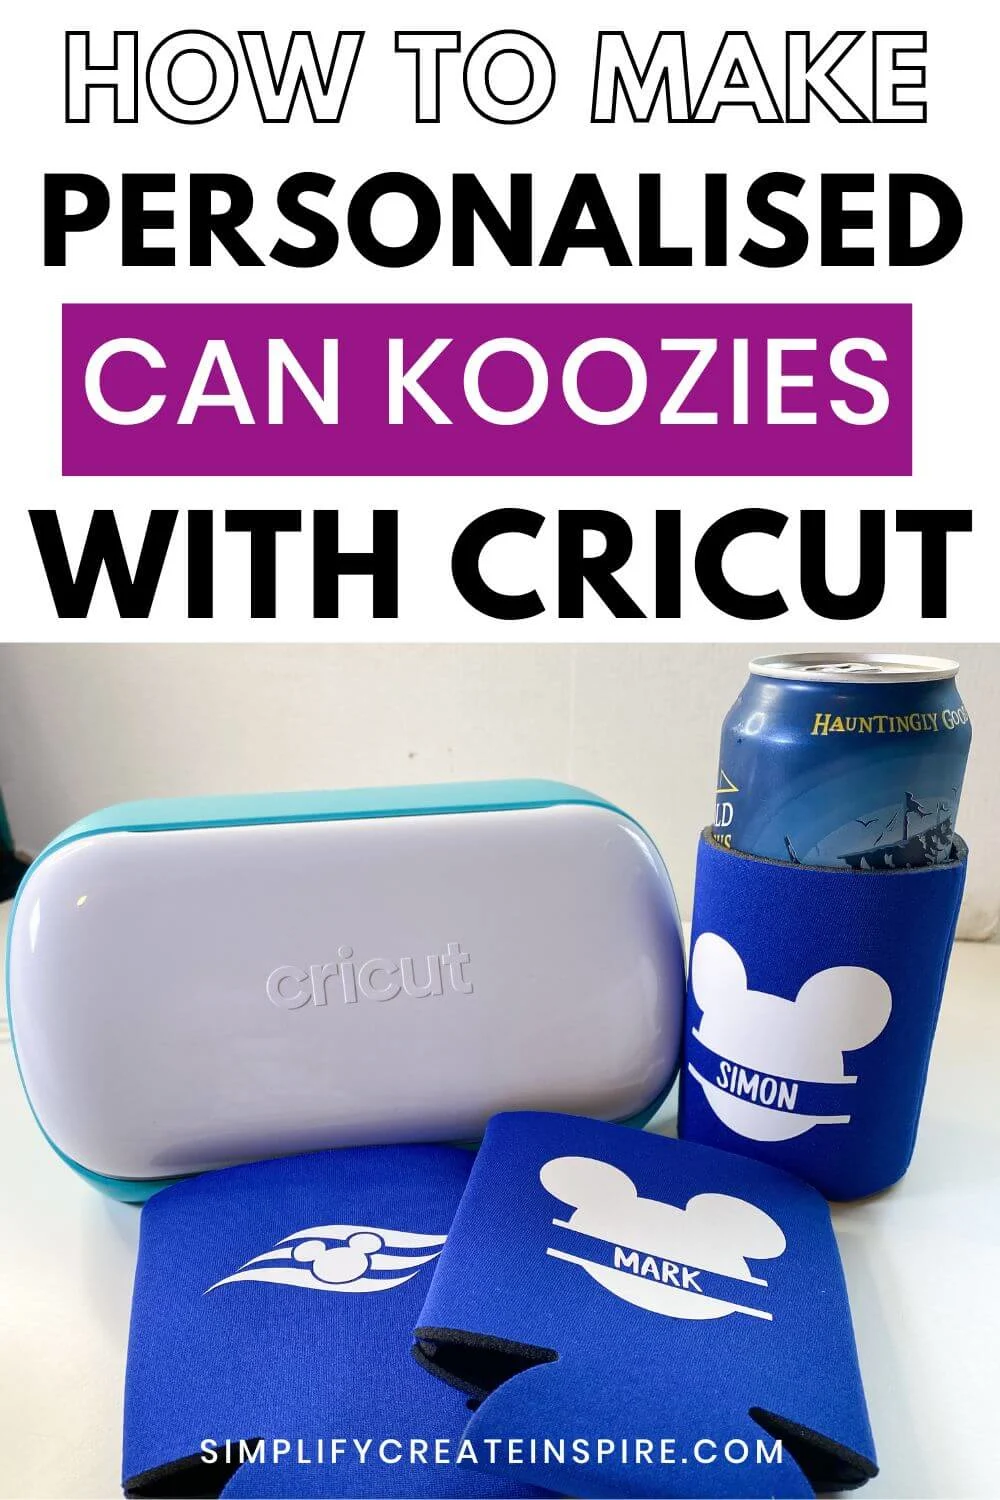 How to make personalised can koozies with cricut.